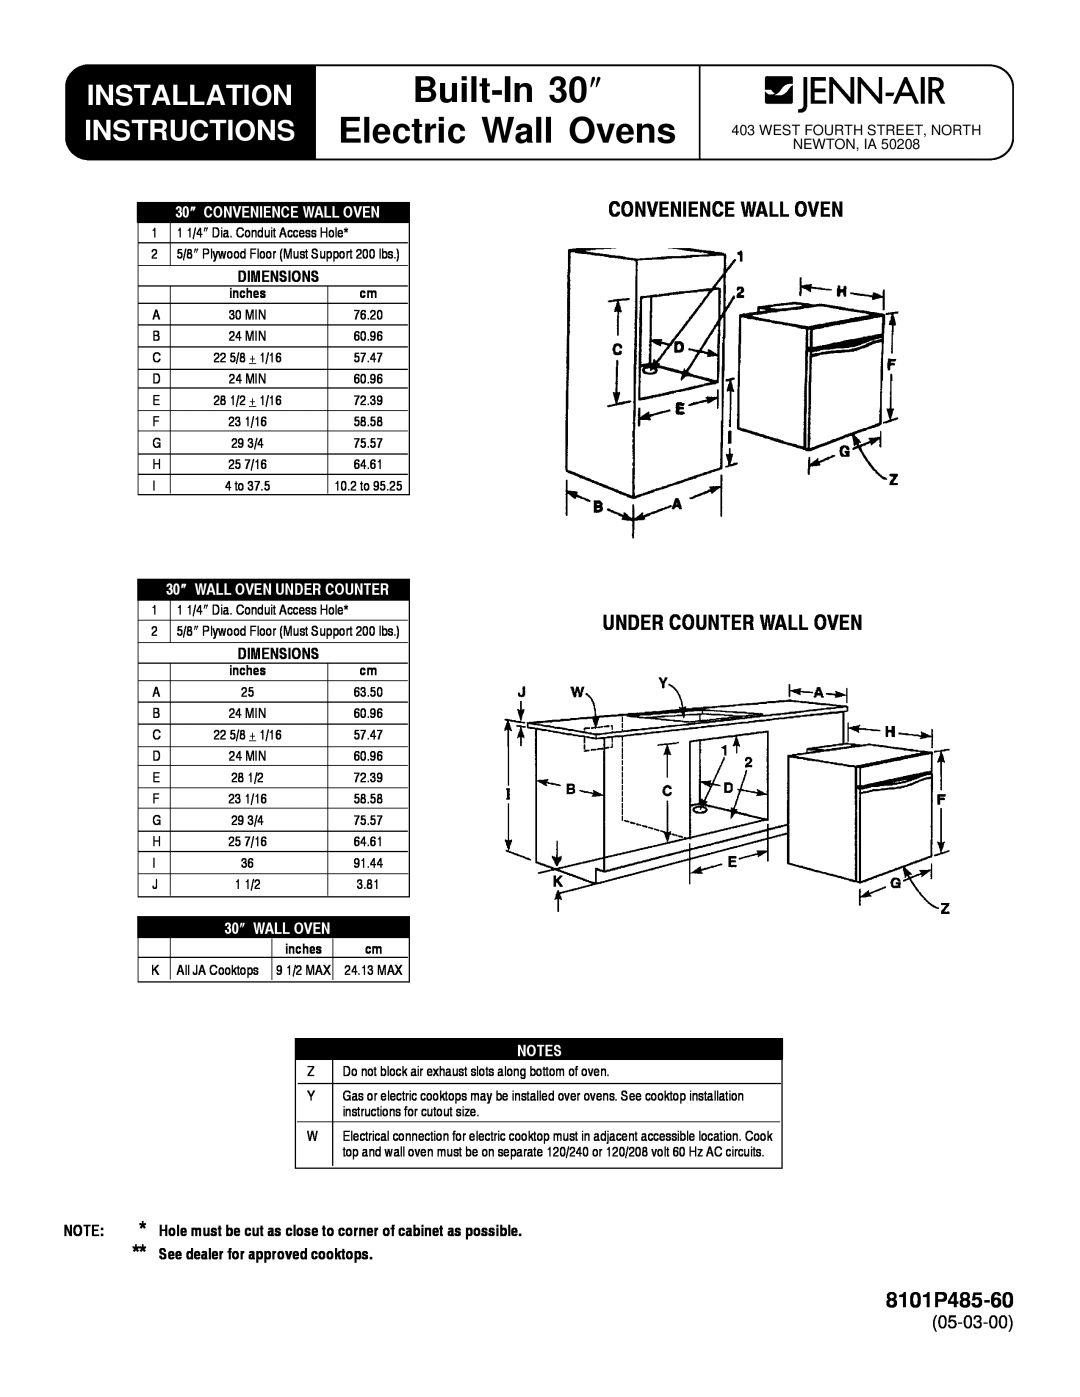 Jenn-Air 8101P485-60 installation instructions Installation, Instructions, Convenience Wall Oven, Under Counter Wall Oven 